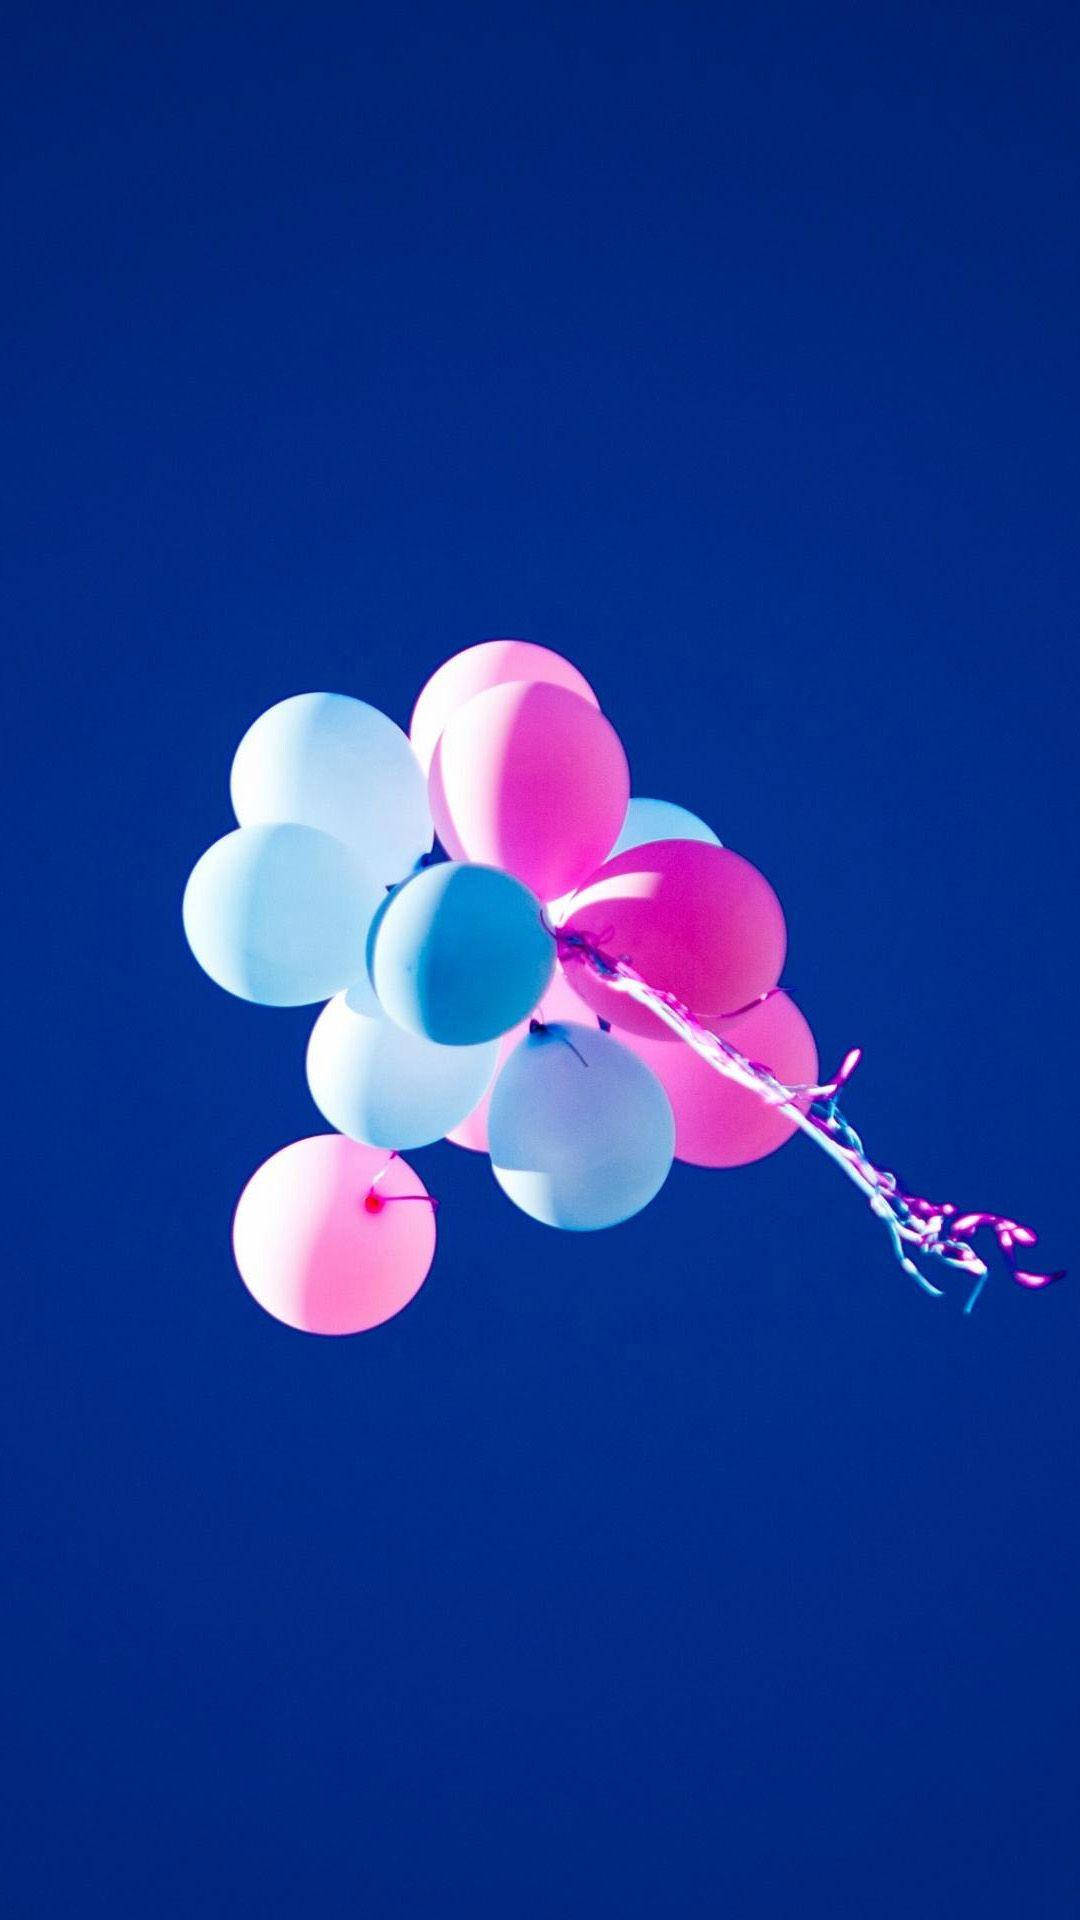 Pink And Blue Balloons Wallpaper